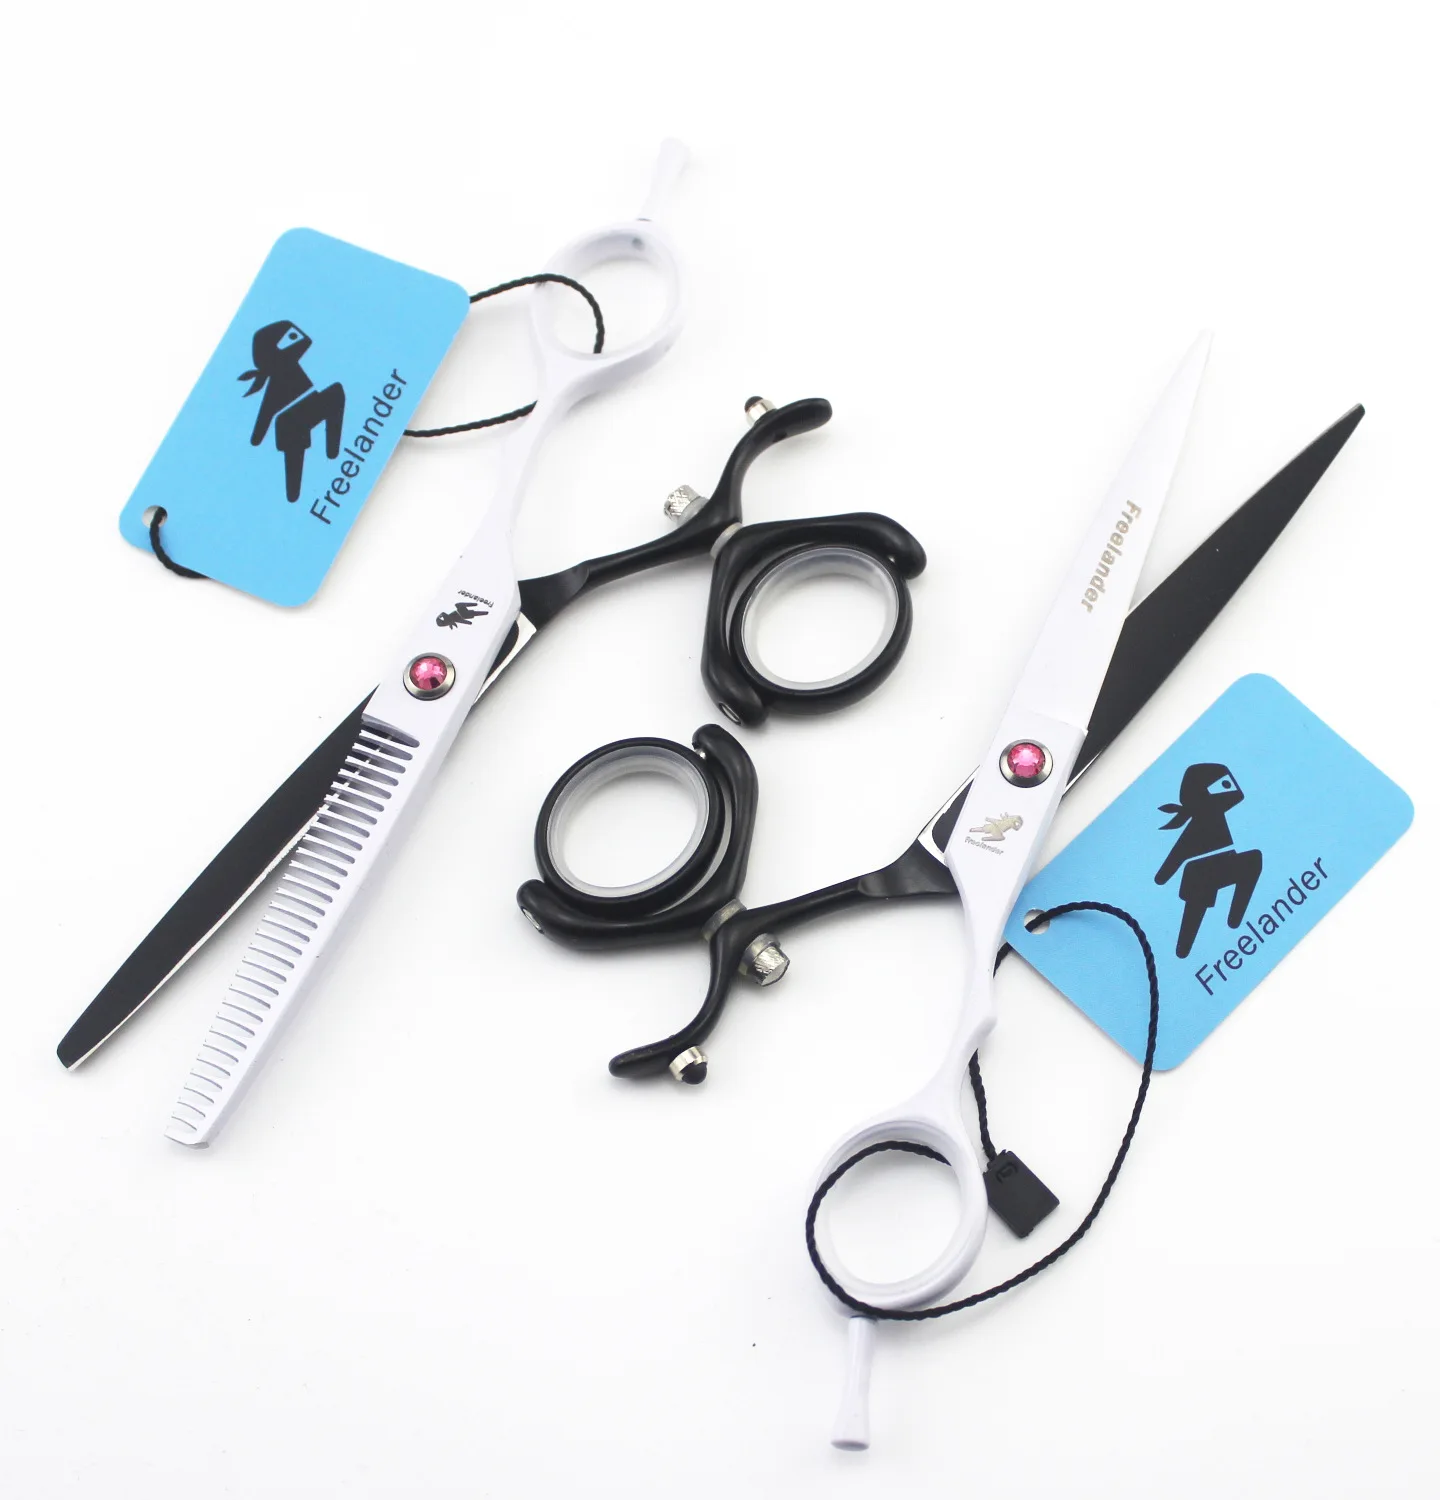 

Freelander black and white paint 6.0 inch flying shear flat shear tooth scissors